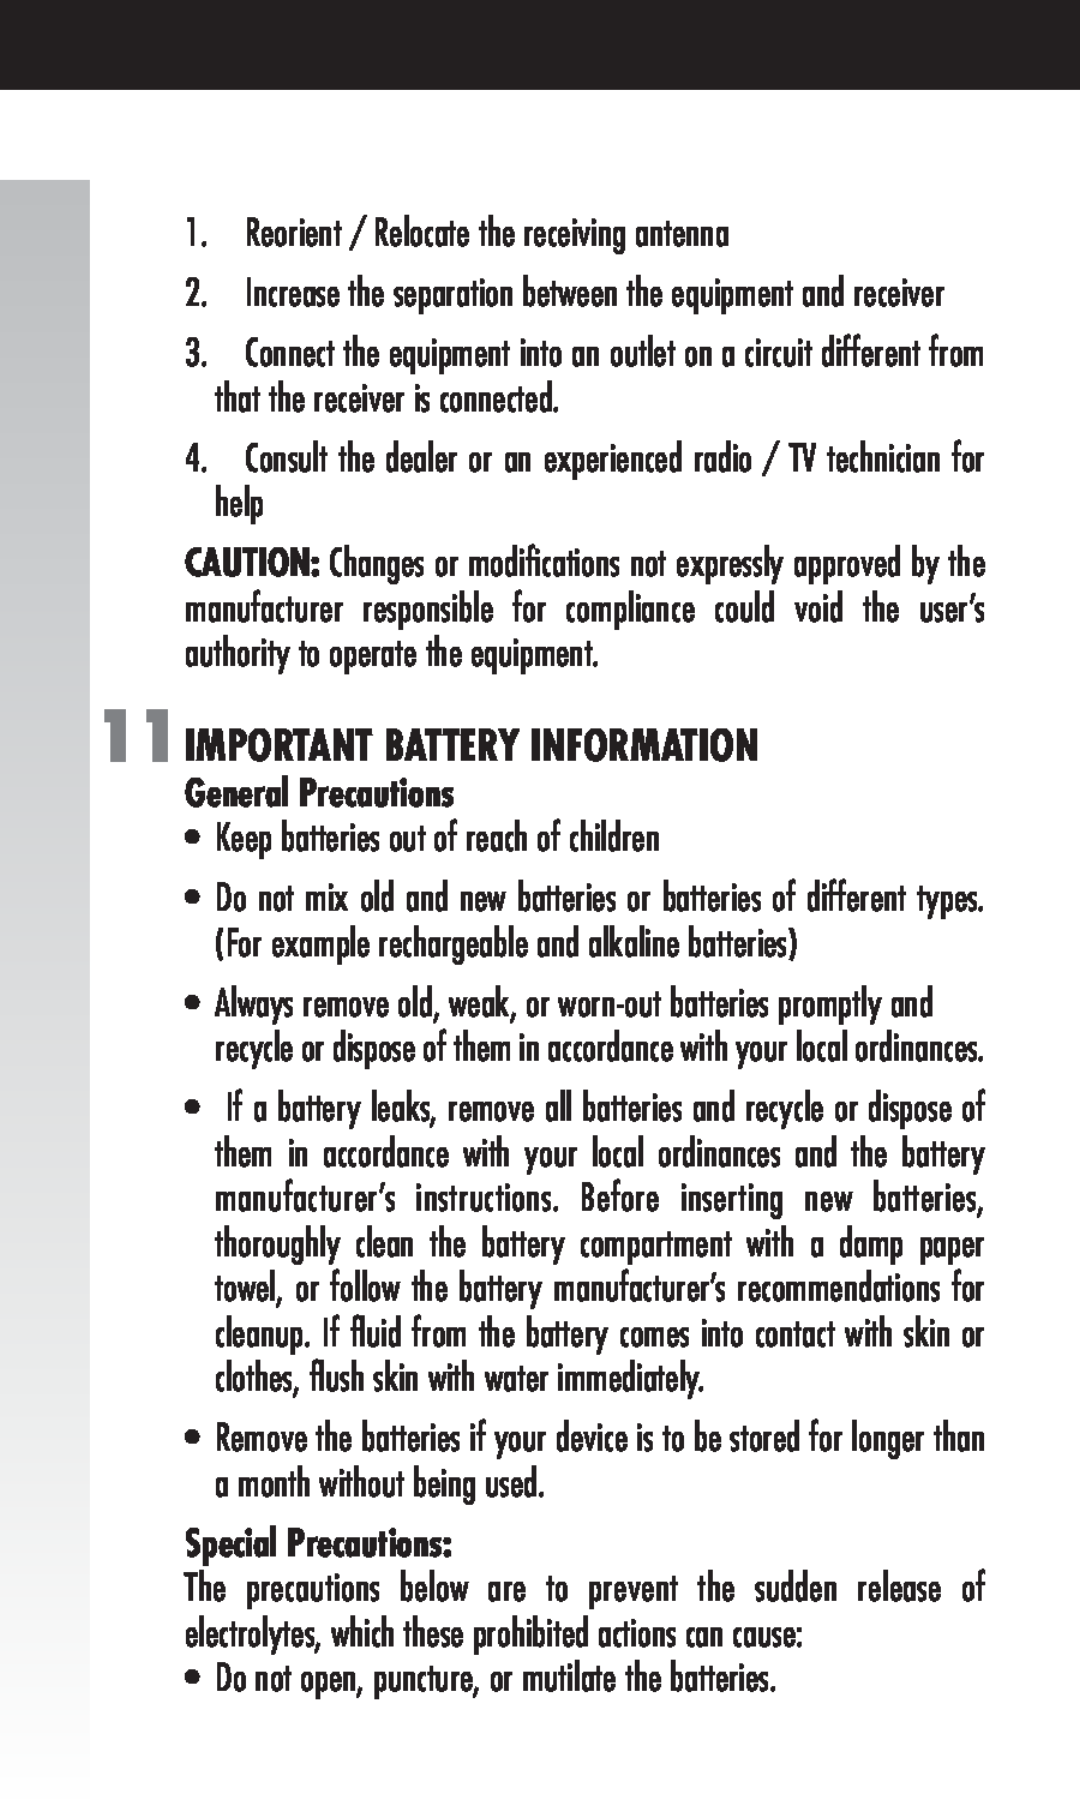 Fellowes Cordless manual 11IMPORTANT BATTERY INFORMATION, Reorient / Relocate the receiving antenna, General Precautions 